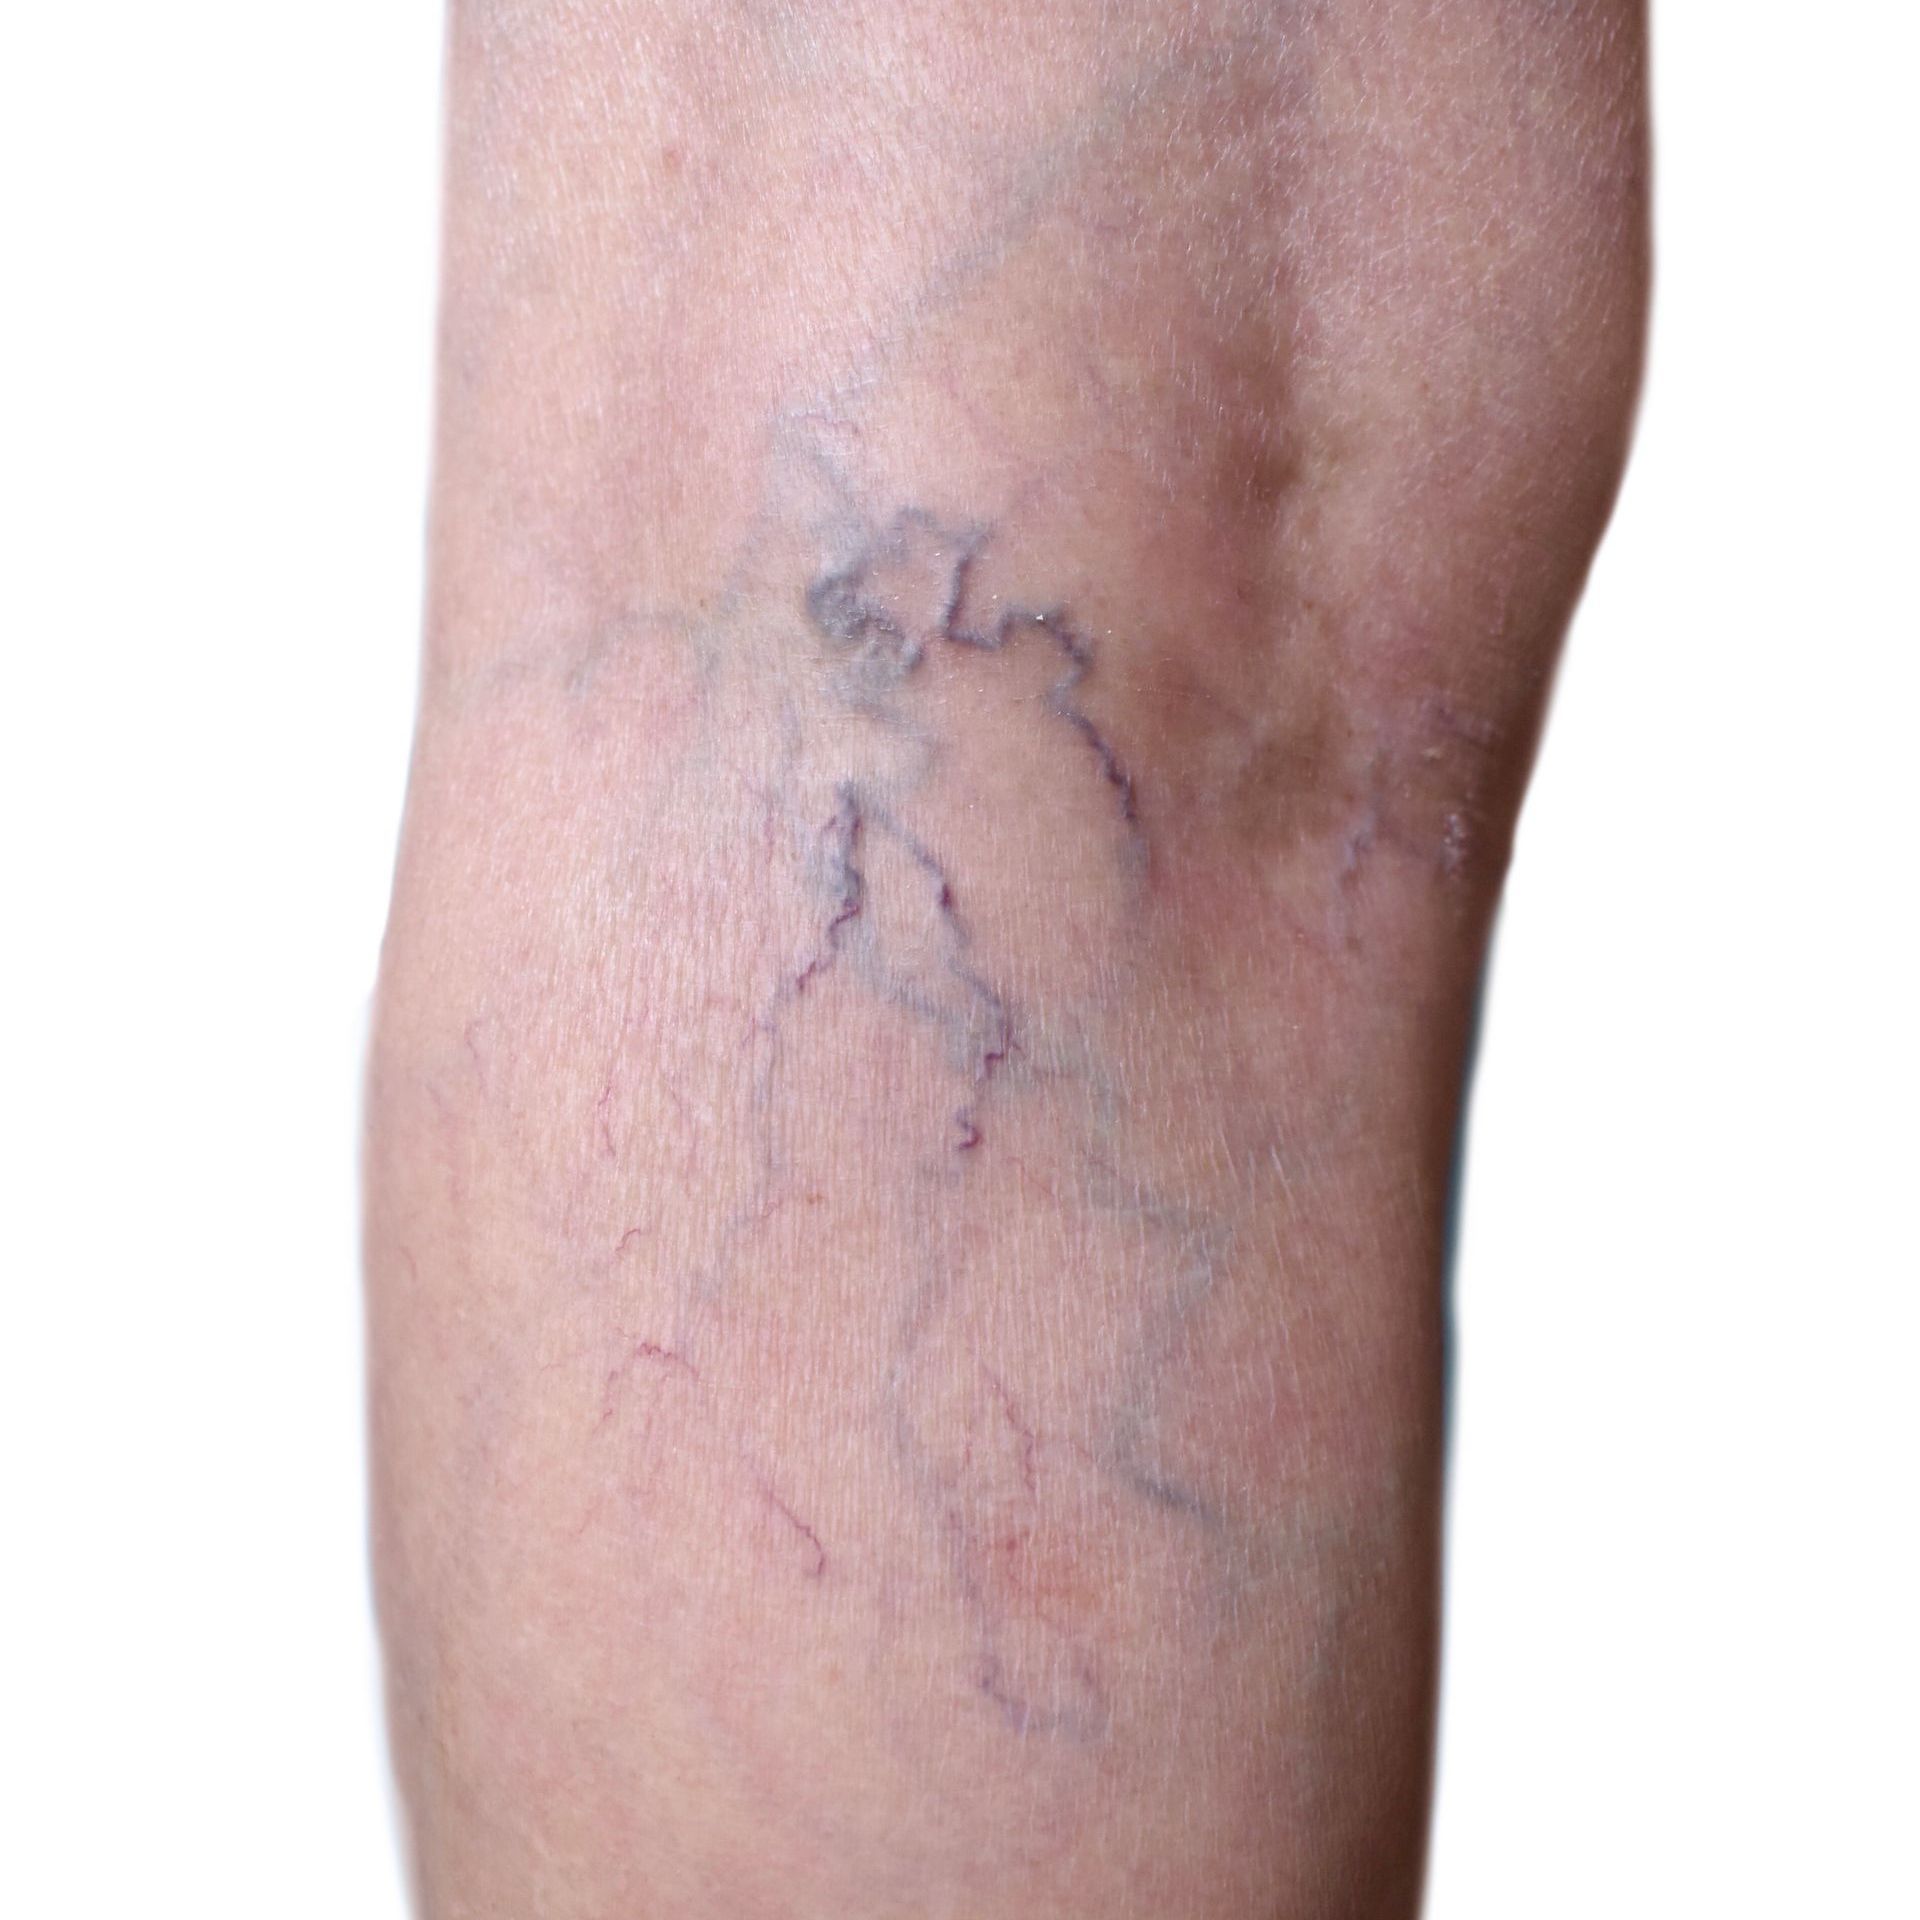 woman with varicose veins